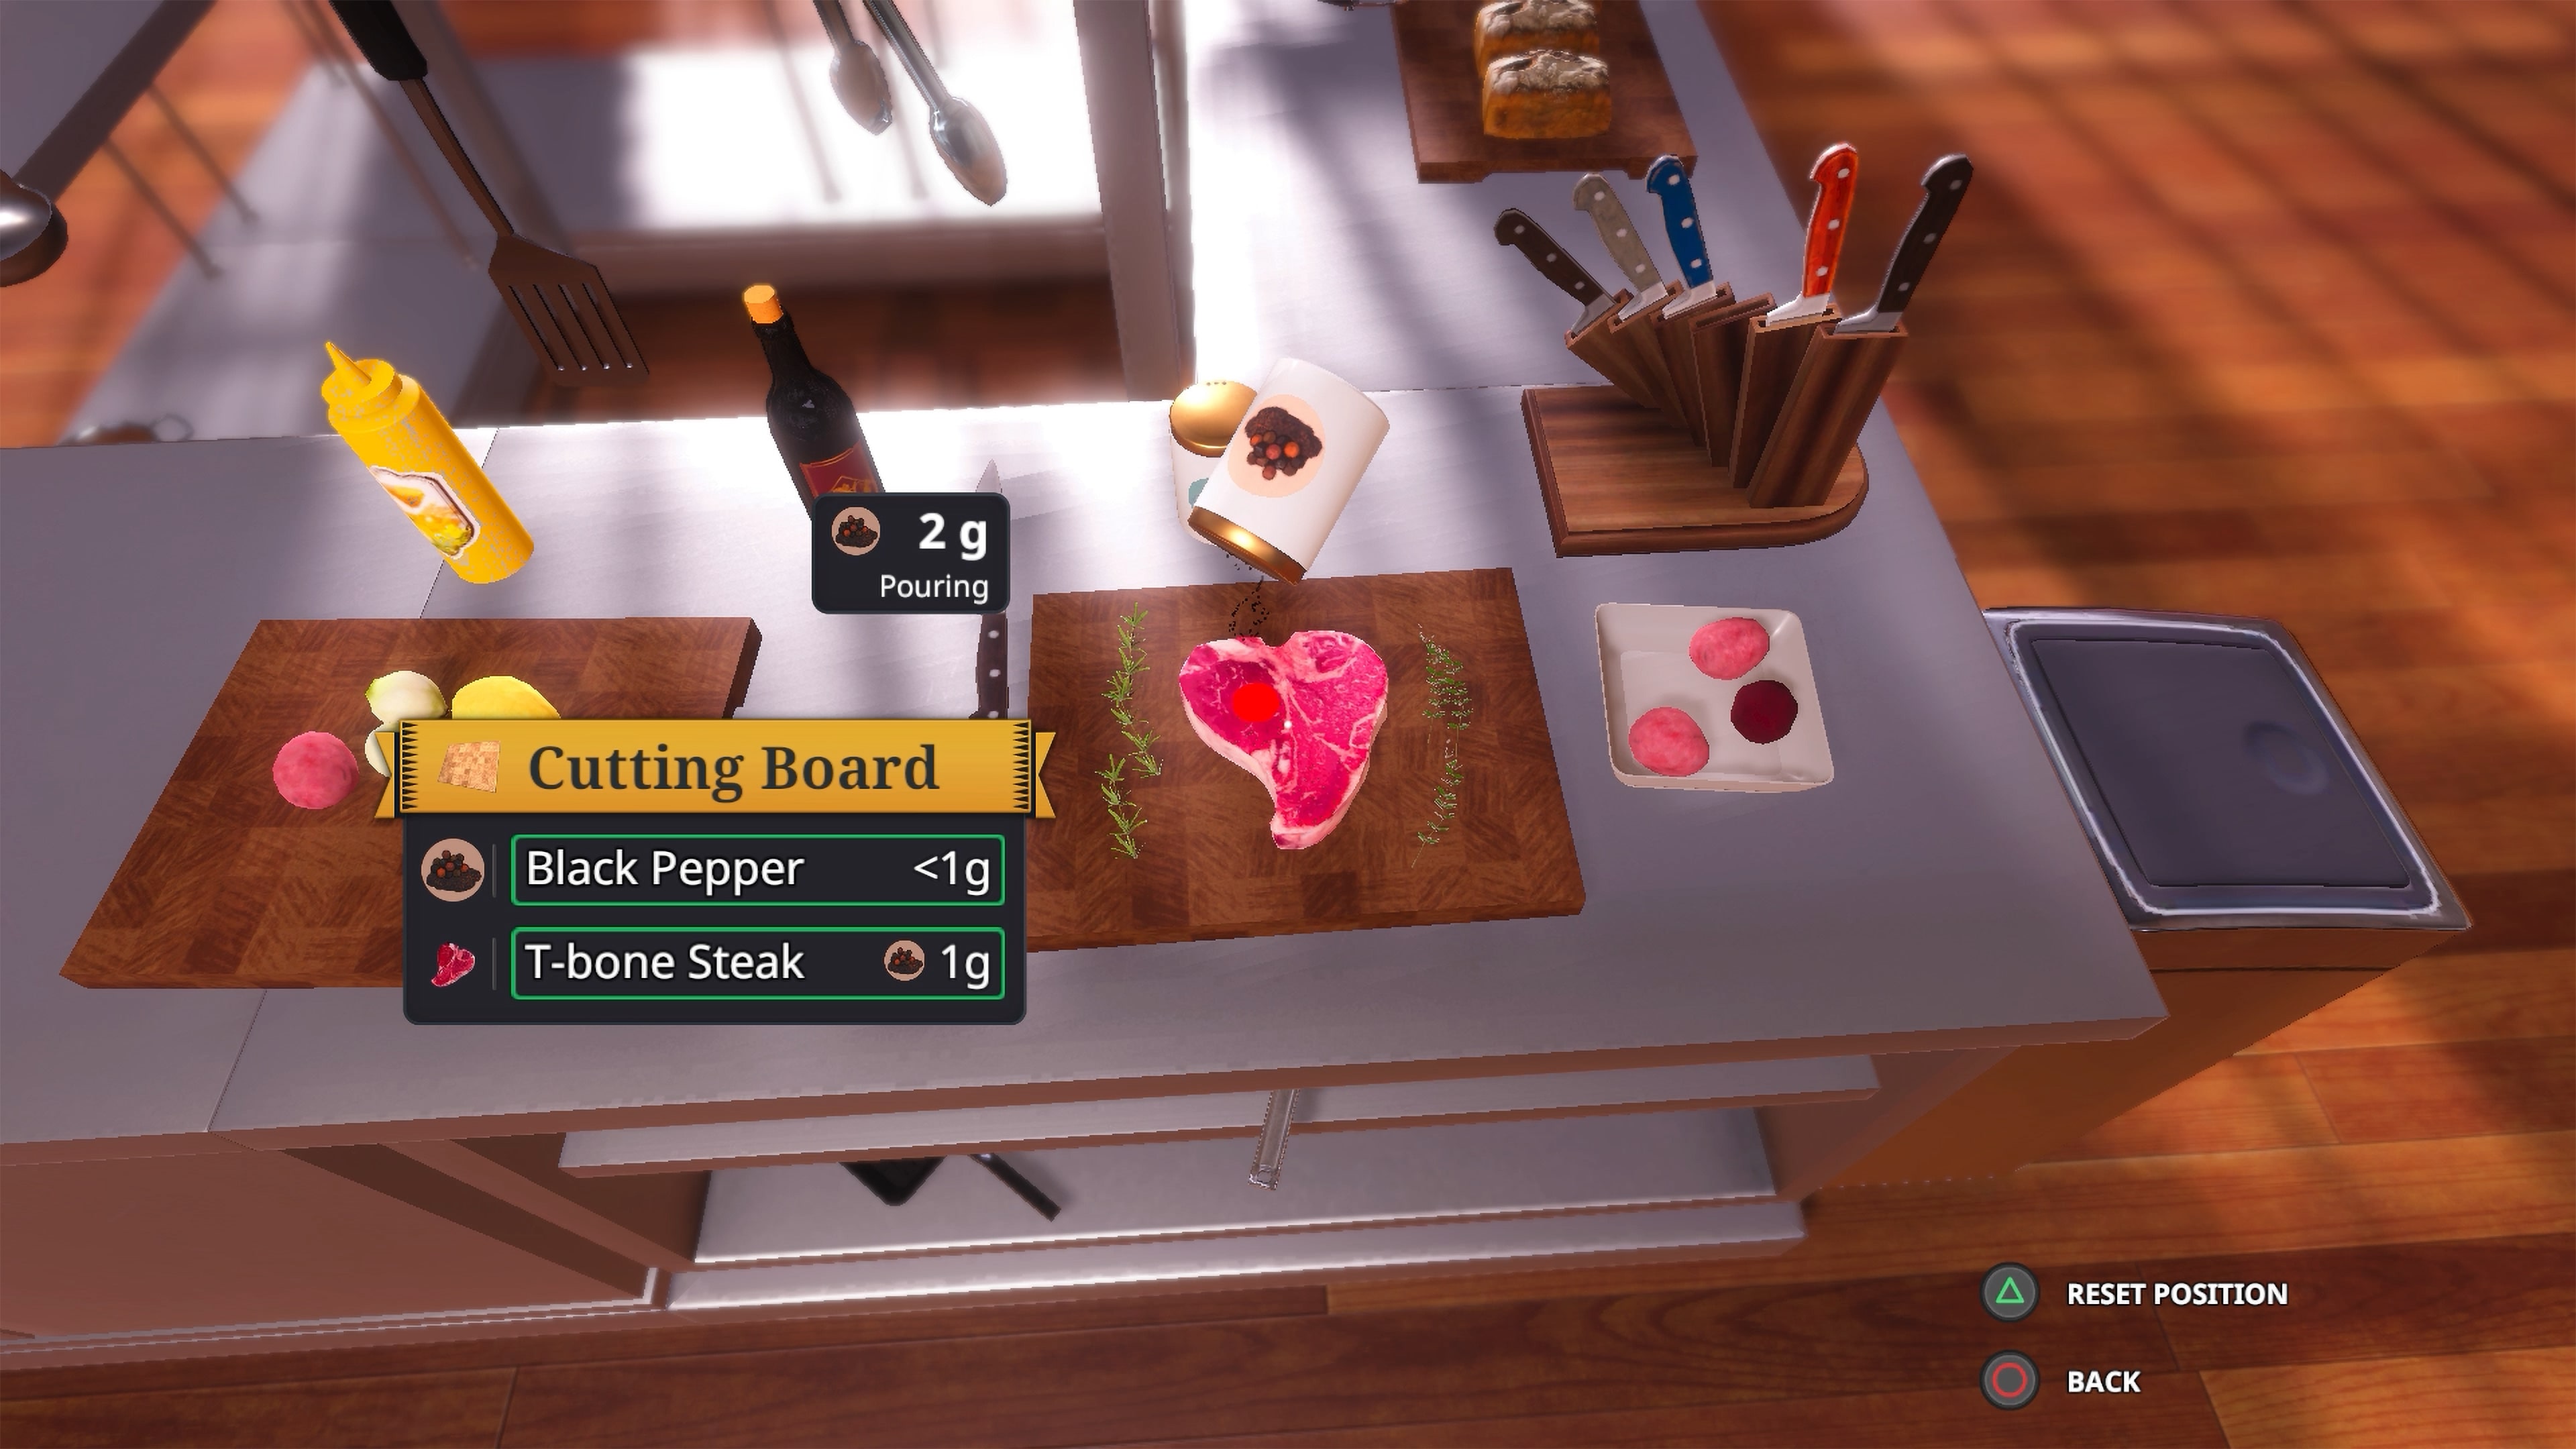 Cooking Simulator: Pizza! - SteamGridDB